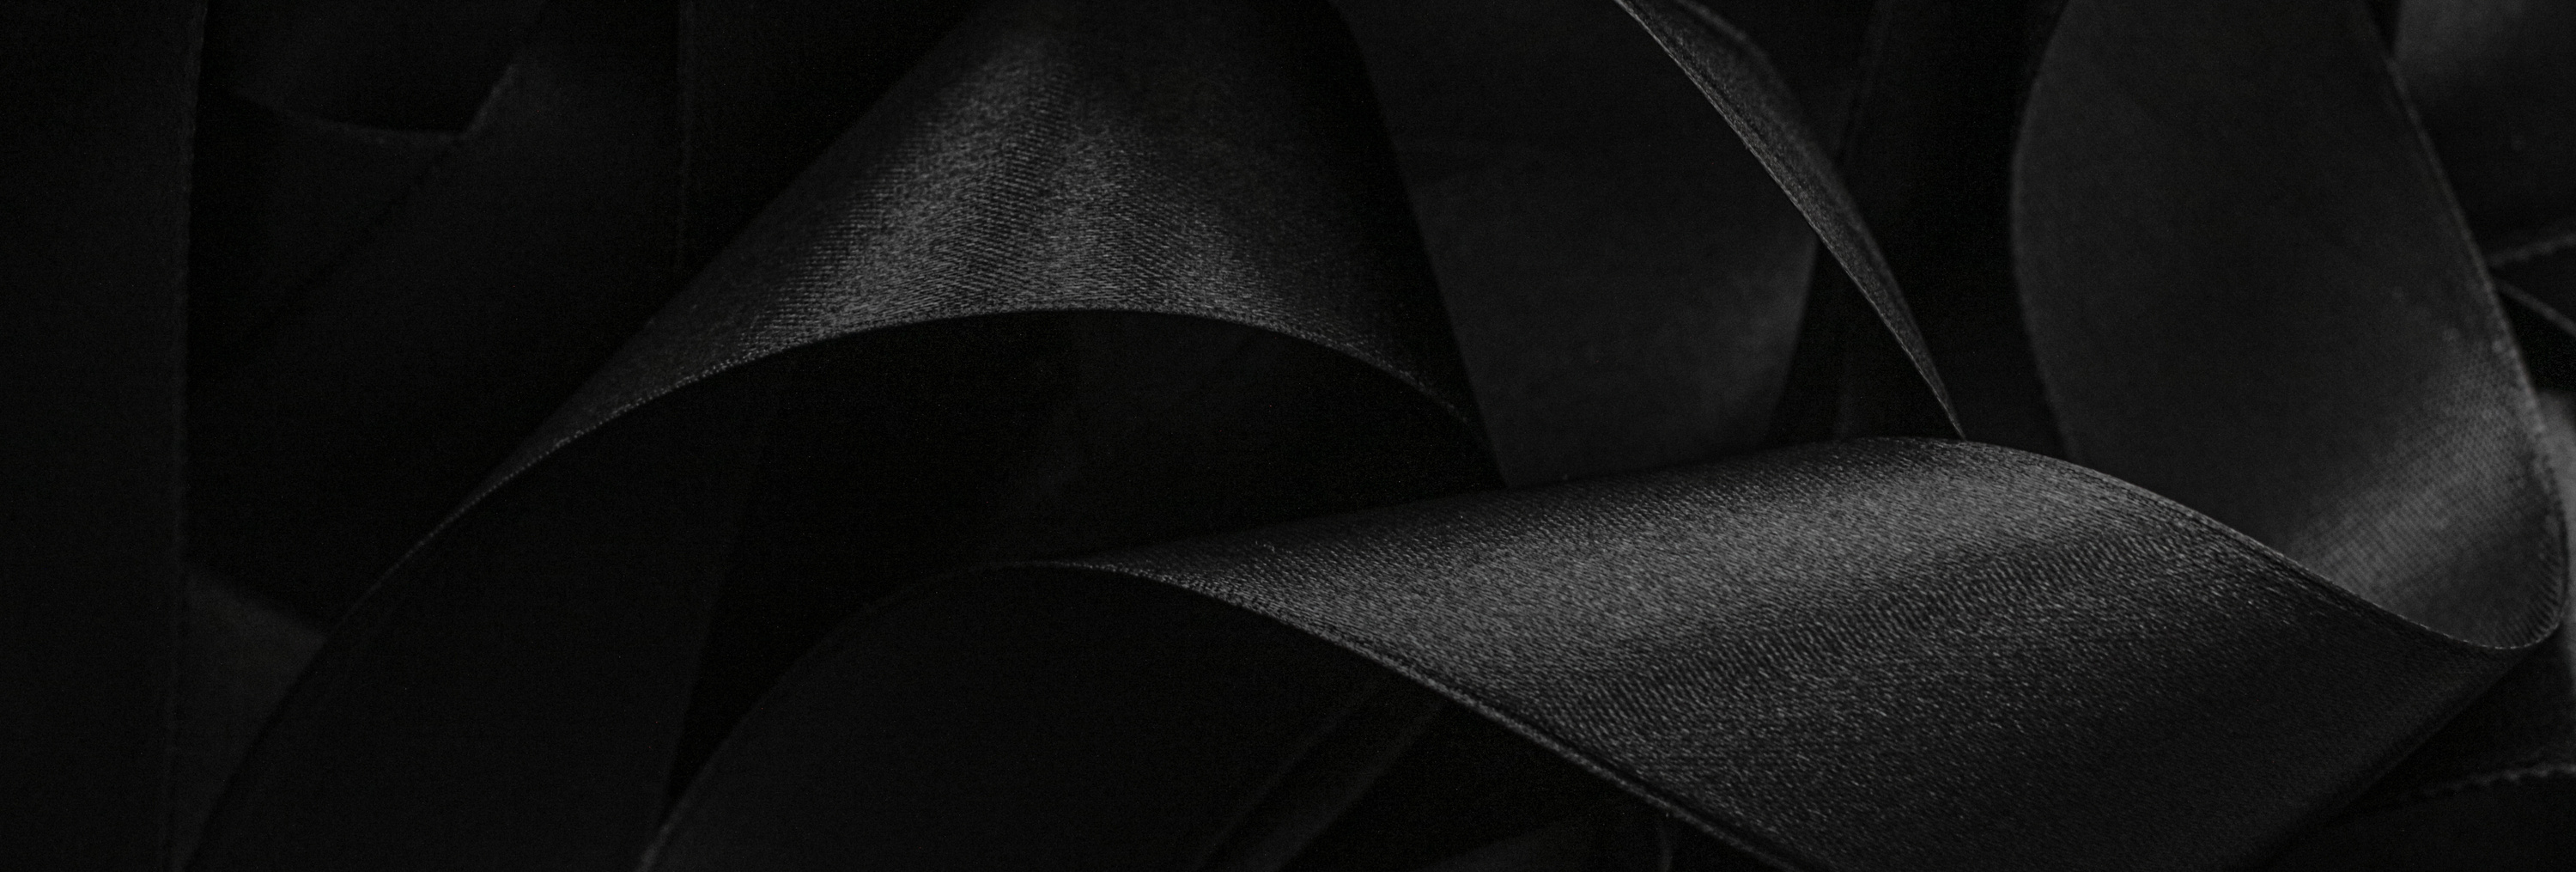 Black Silk Ribbon as Background, Abstract and Luxury Brand Design